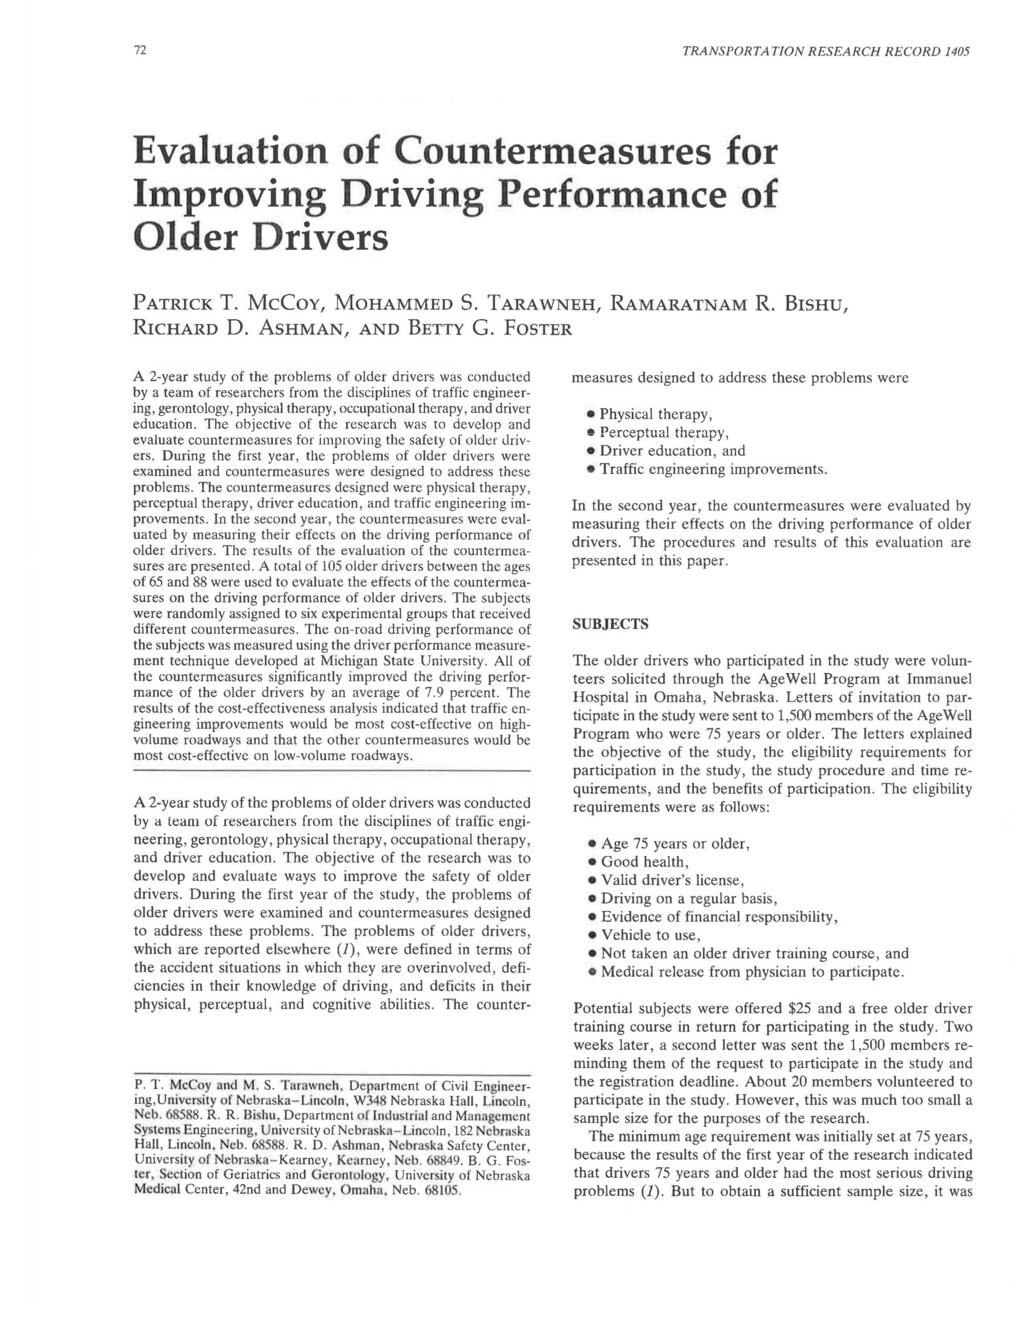 72 TRANSPORTATION RESEARCH RECORD 1405 Evaluation of Countermeasures for Improving Driving Performance of Older Drivers PATRICK T. McCOY, MoHAMMED S. TARAWNEH, RAMARATNAM R. BrsHu, RICHARD D.